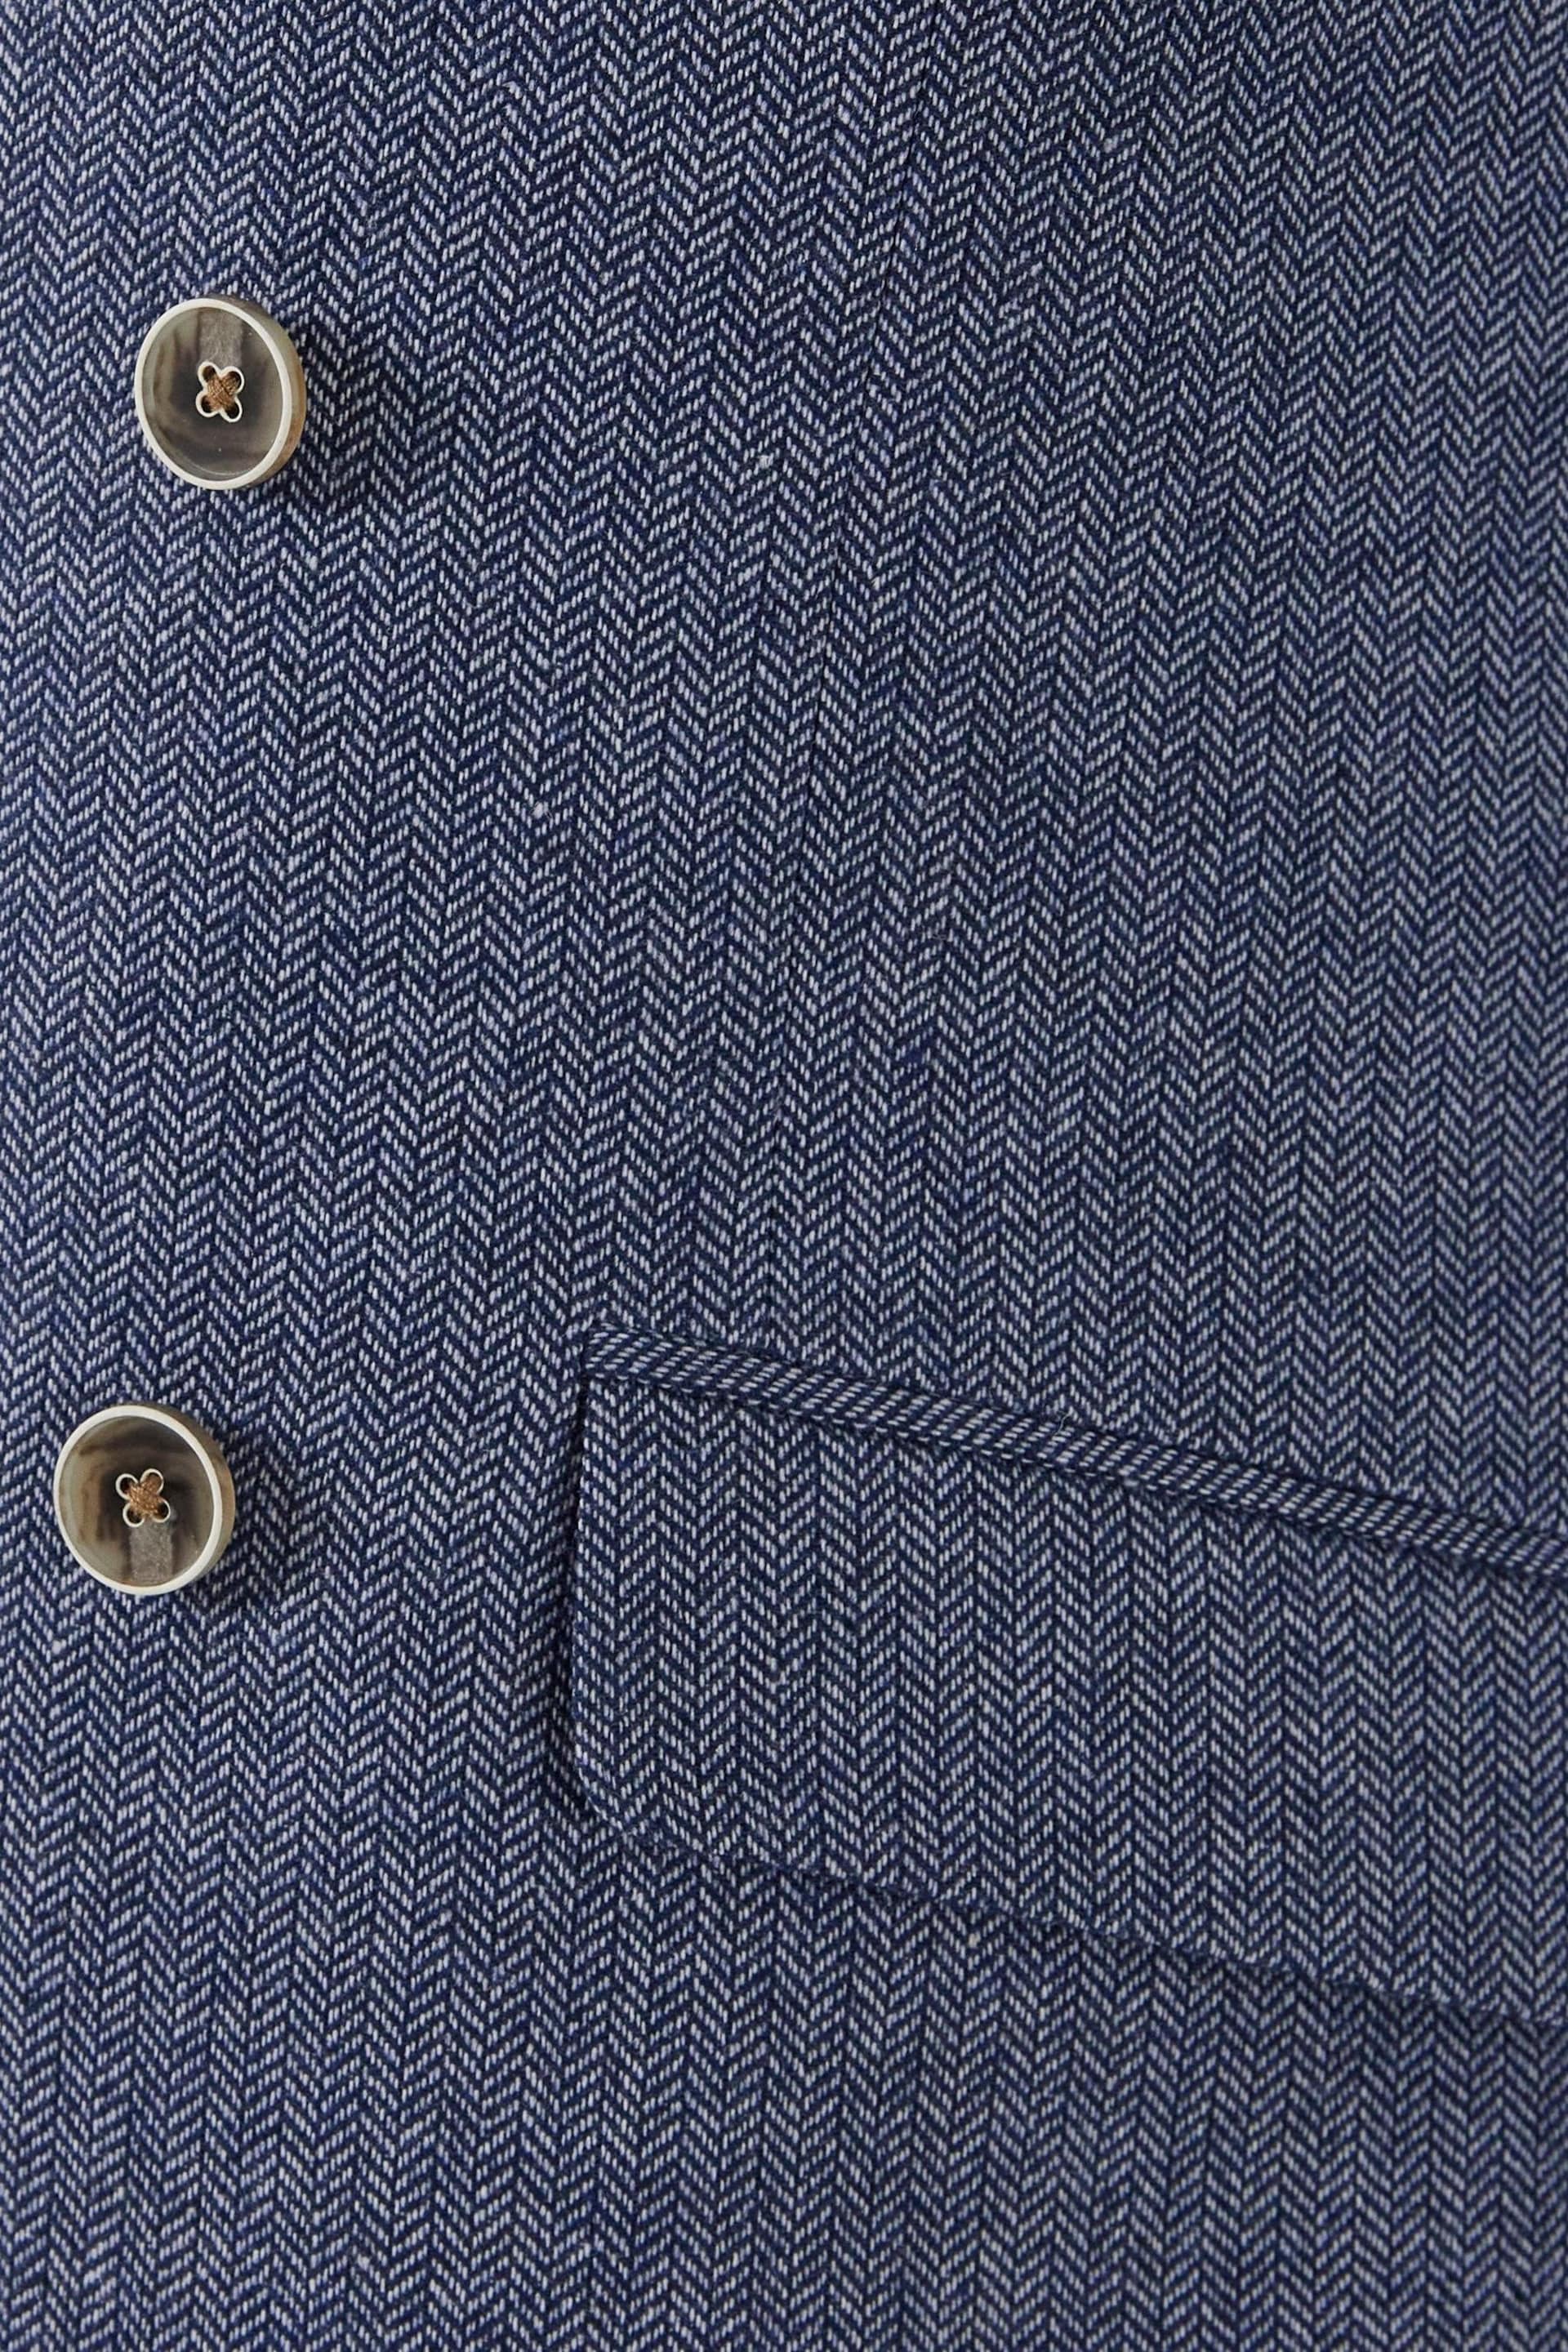 Skopes Tailored Fit Blue Herringbone Double Breasted Suit: Jacket - Image 8 of 9